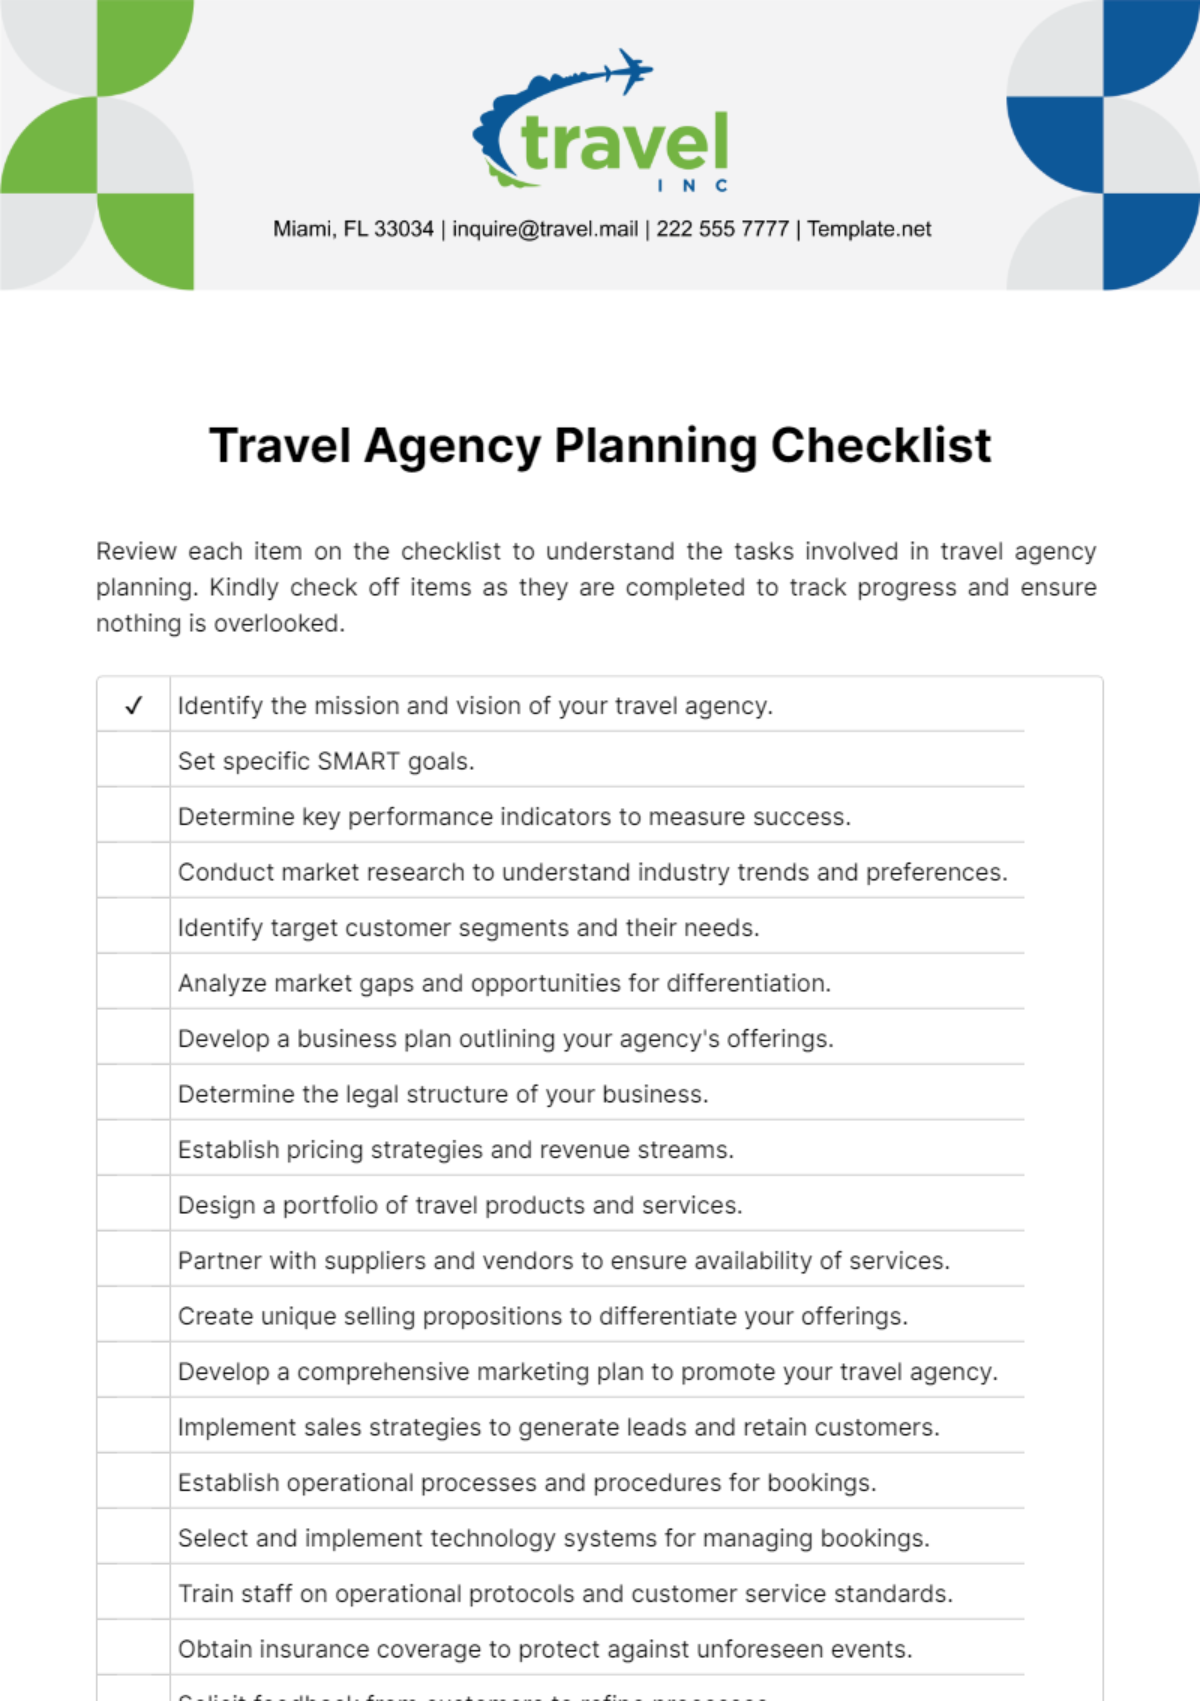 Travel Agency Planning Checklist Template